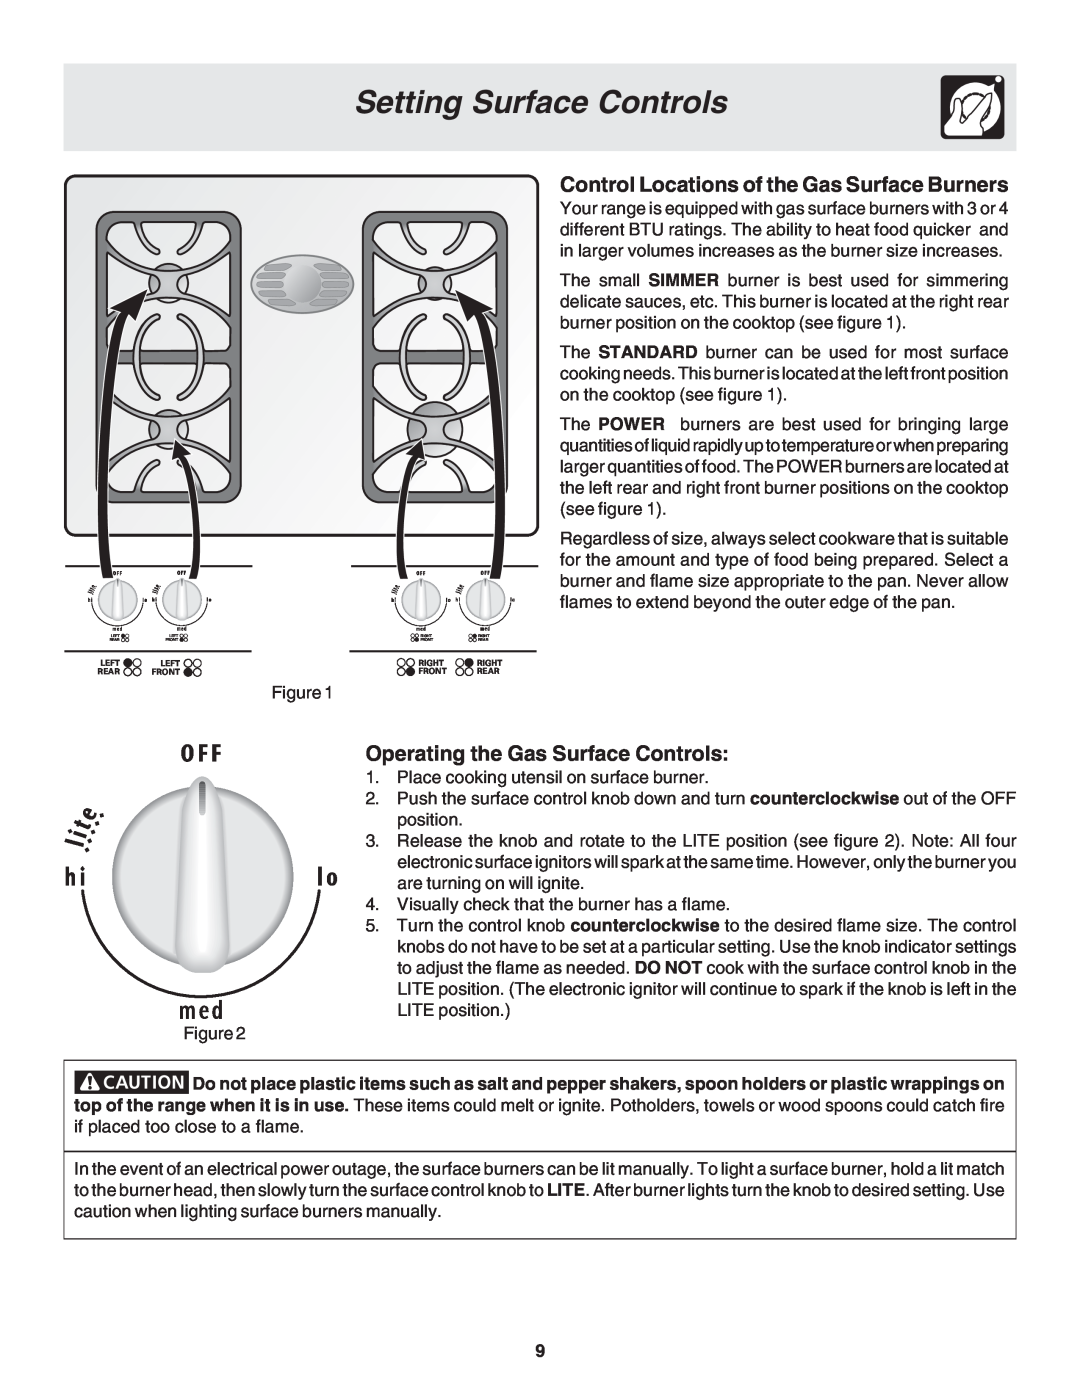 Frigidaire 318200879 manual Setting Surface Controls, Control Locations of the Gas Surface Burners 